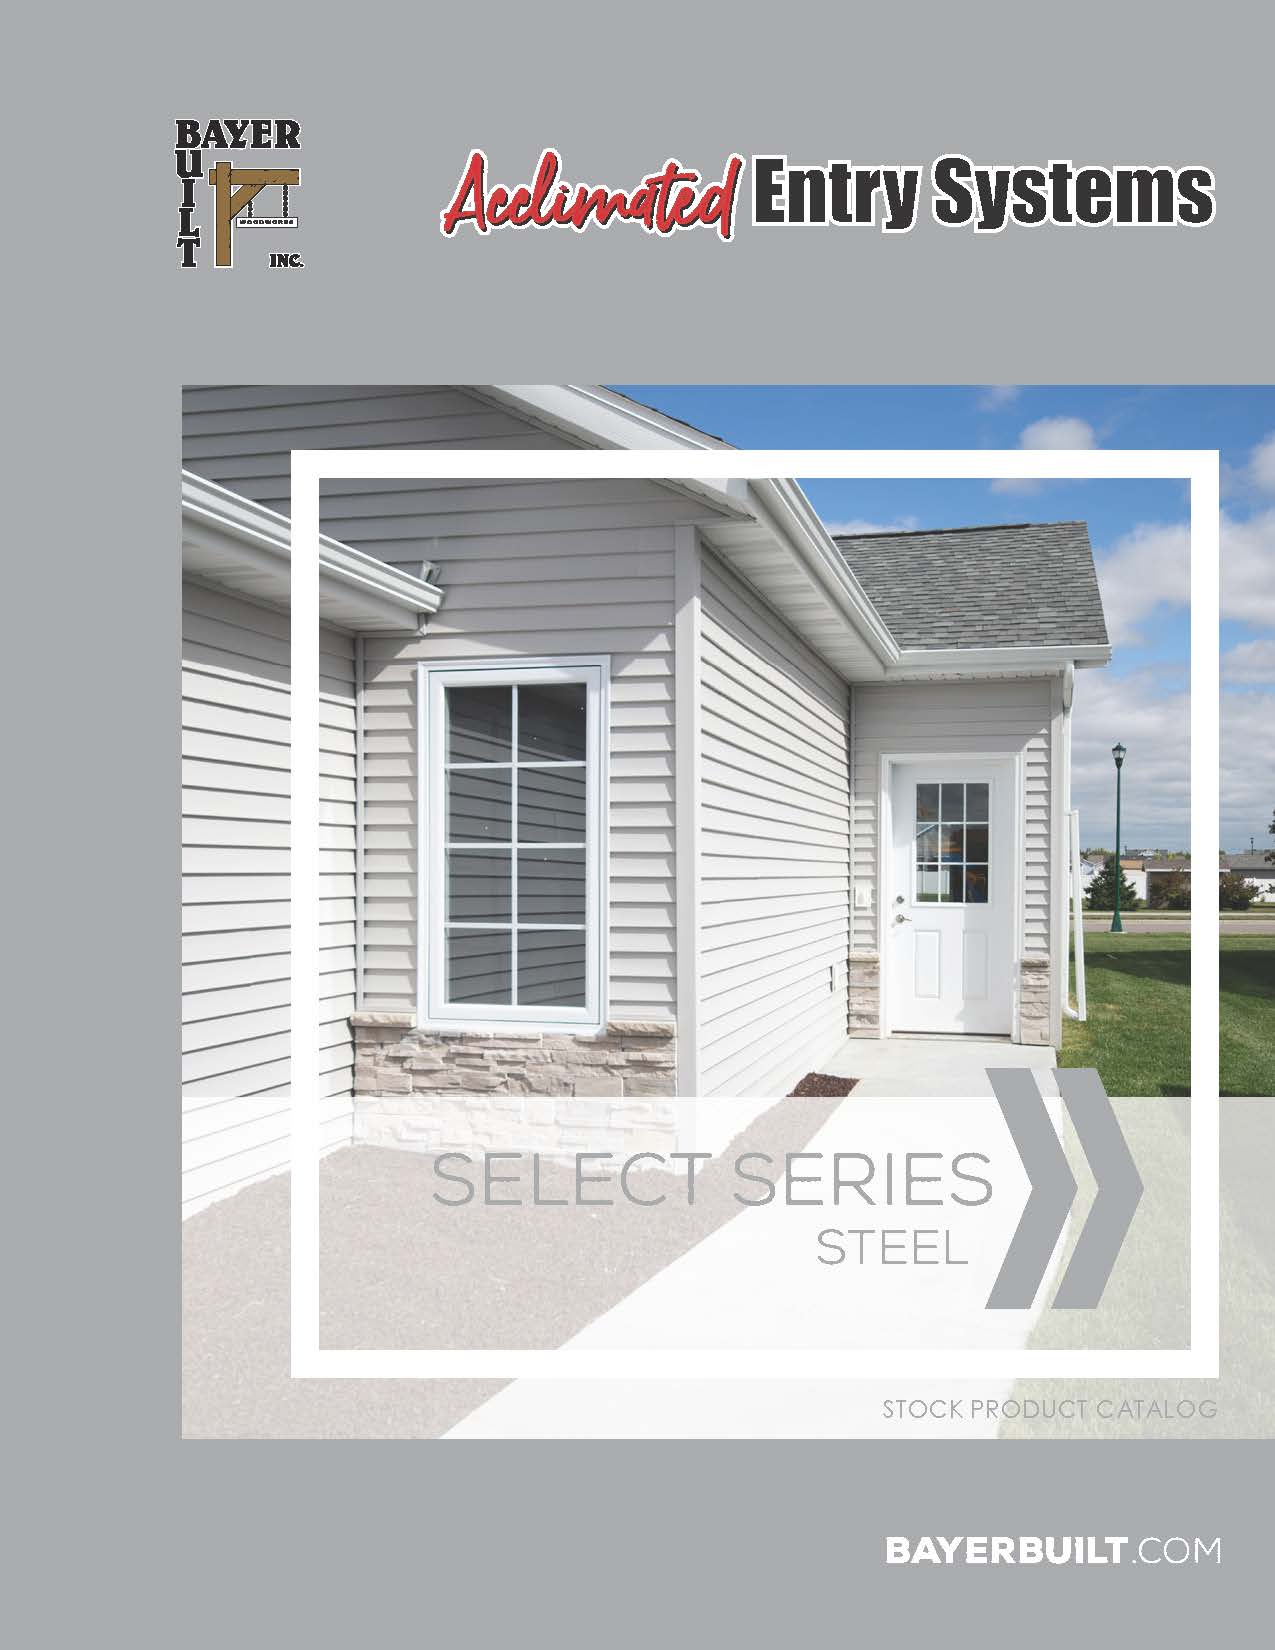 Select Steel | Acclimated Entry Systems